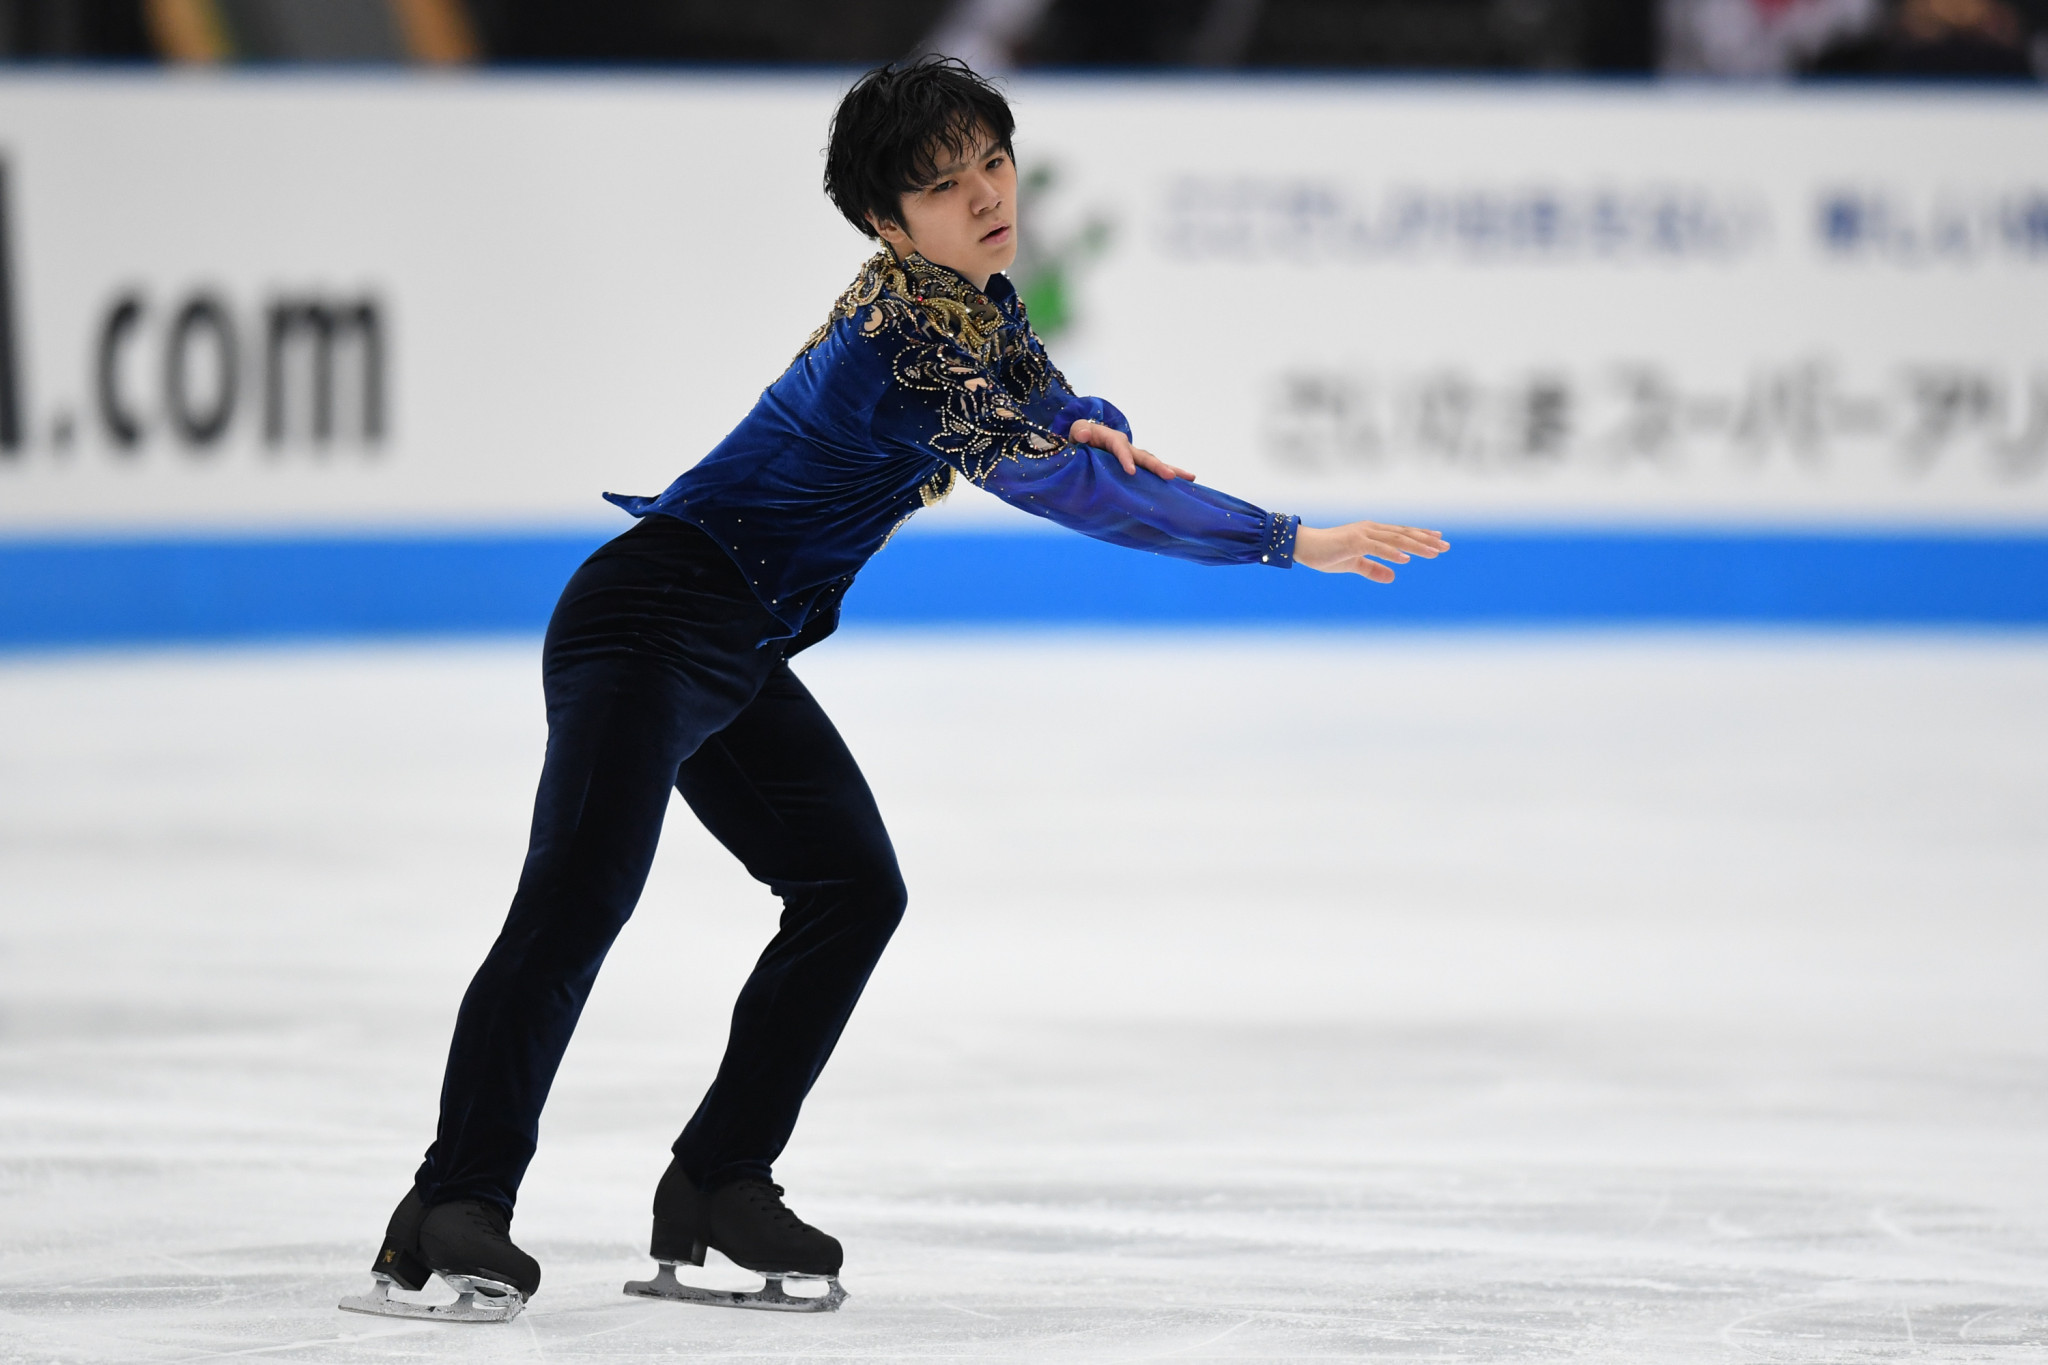 World silver medallist Shoma Uno is also set to compete at Skate Canada International ©Getty Images